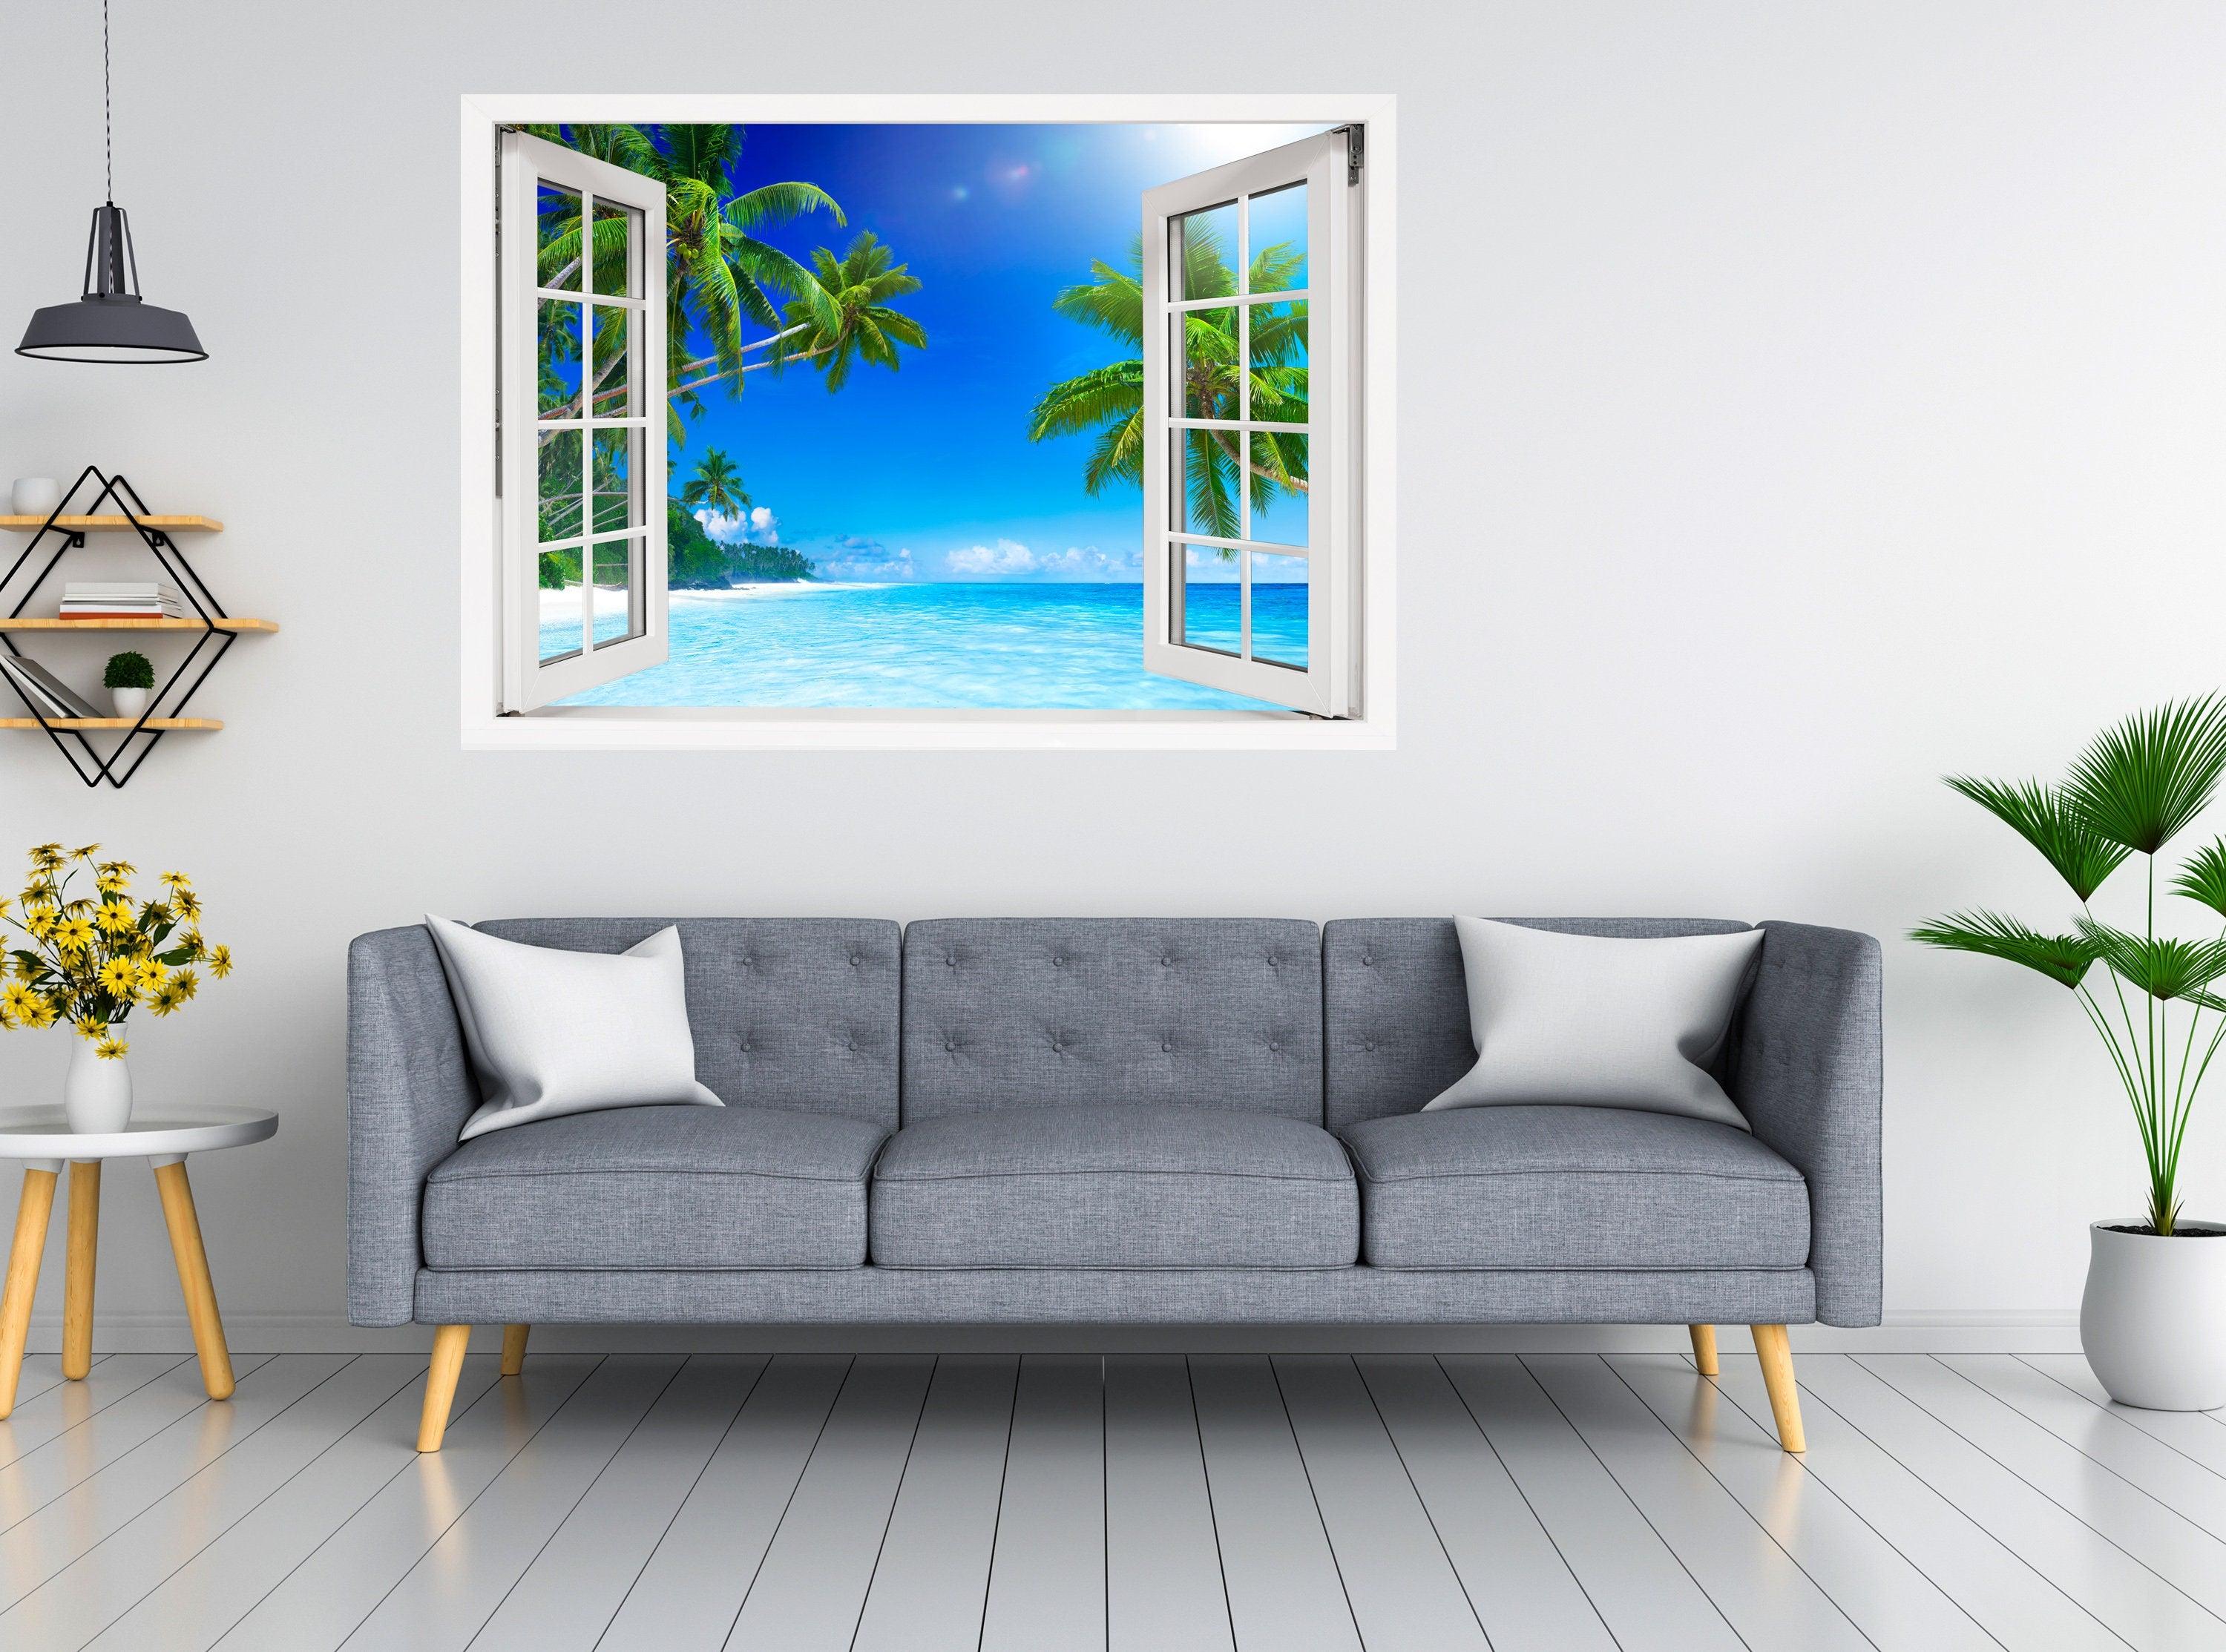 Window Scape Beach Palm Tree over white Sand #27, Window Decal, Sticker Sunset, Removable, Fabric, Window Frame, Office, Bedroom, 3D